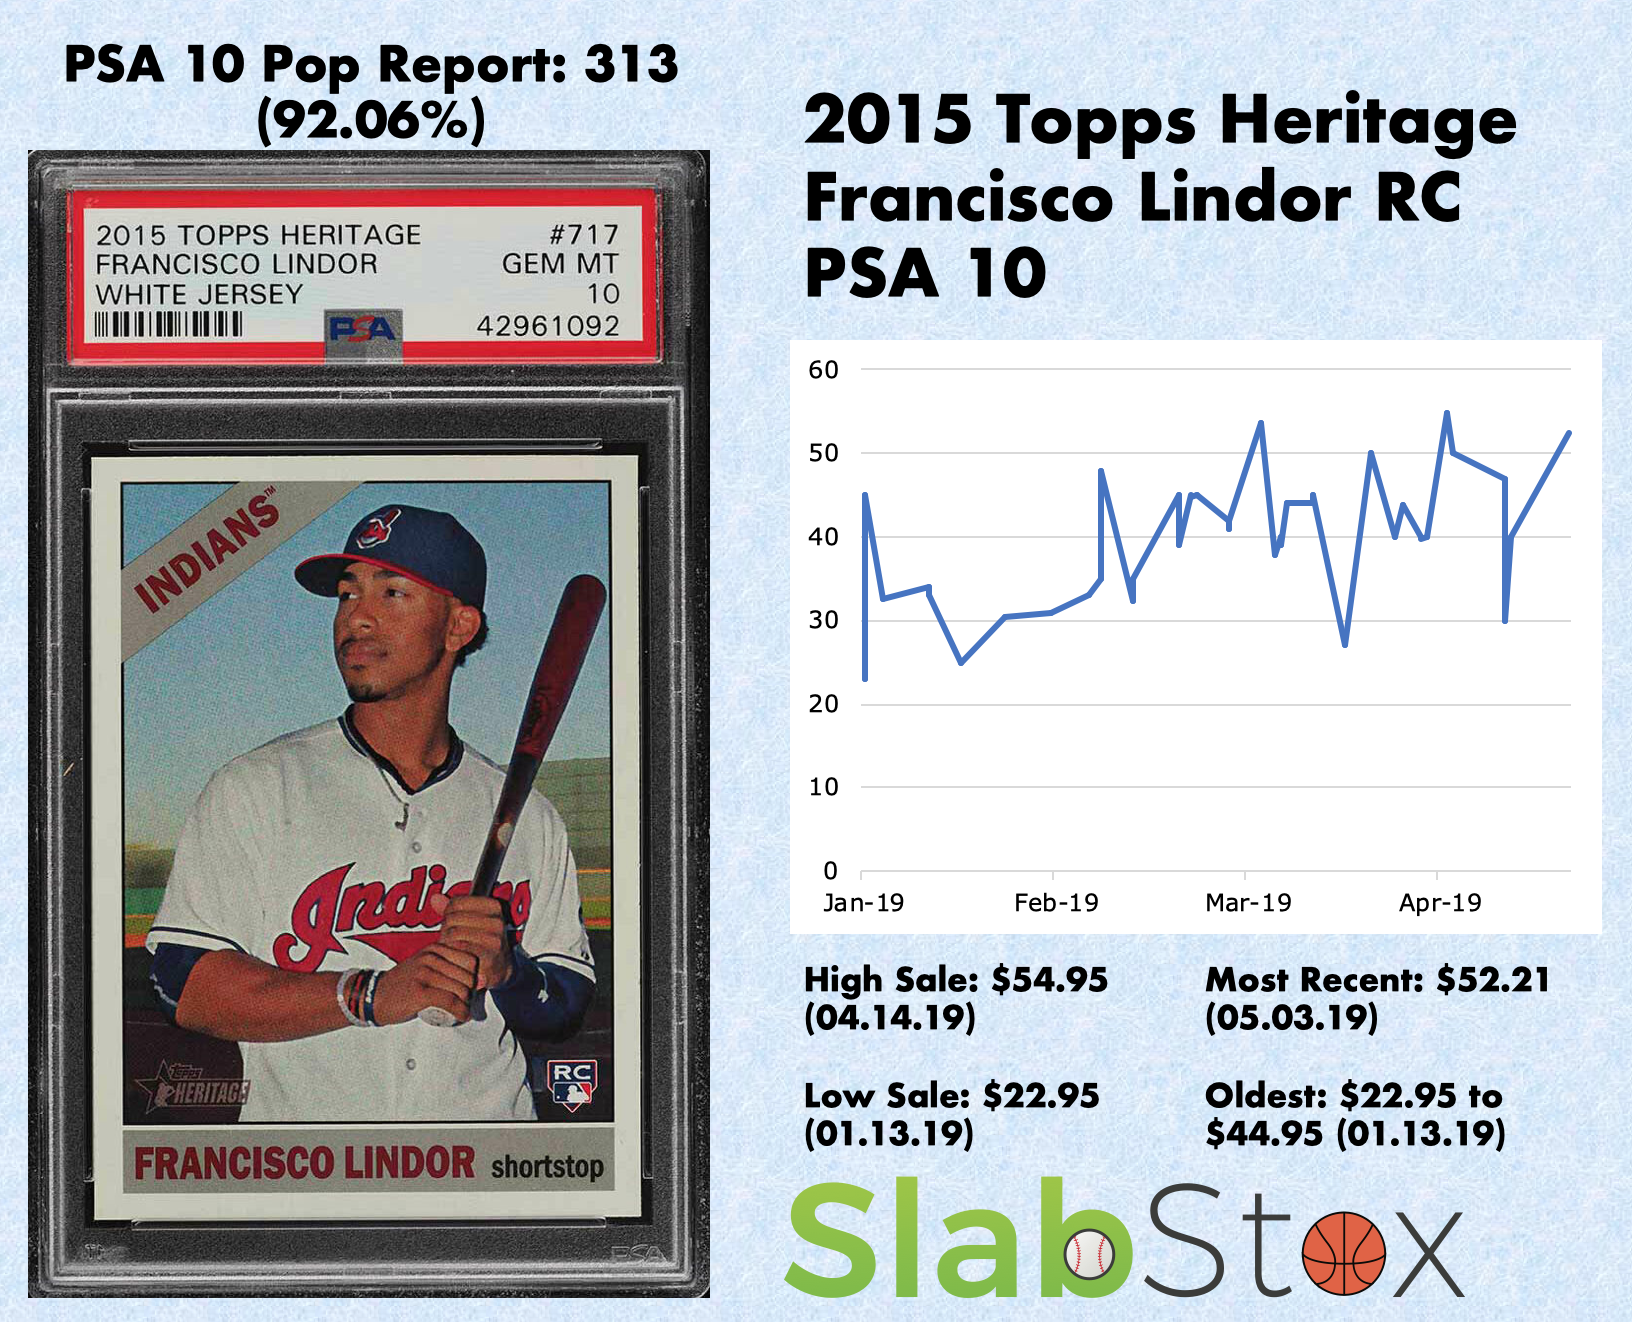 SlabStox infographic for 2015 Topps Heritage Francisco Lindor RC PSA 10 sports trading card